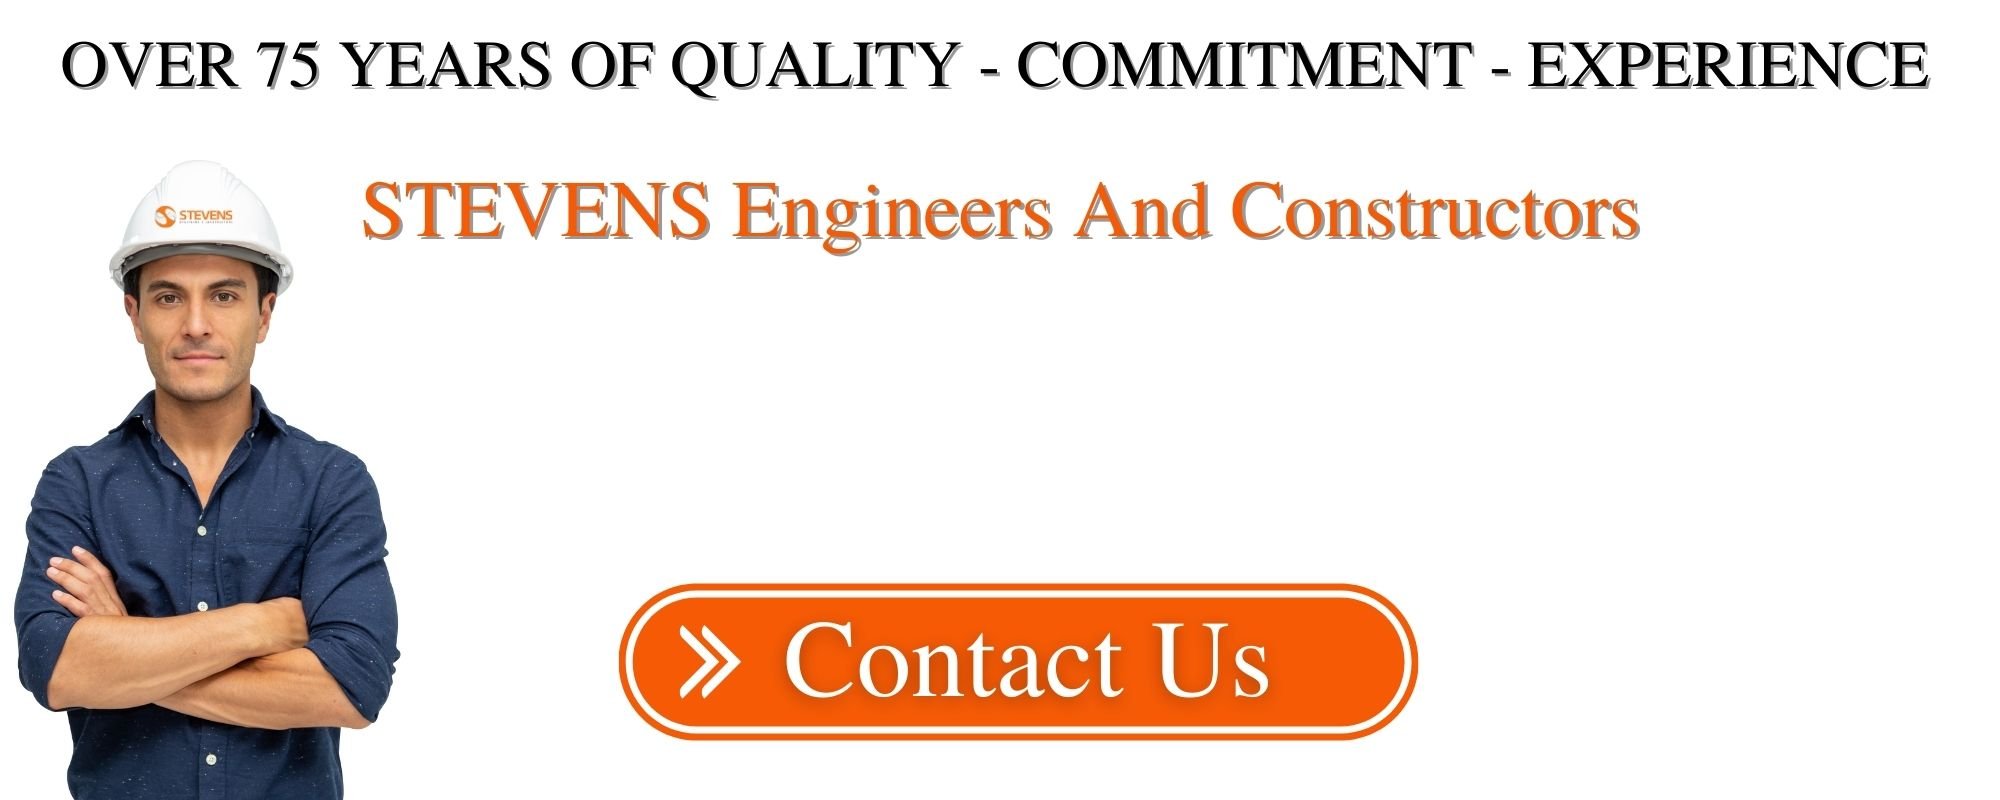 75-years-of-quality-construction-commitment-experience